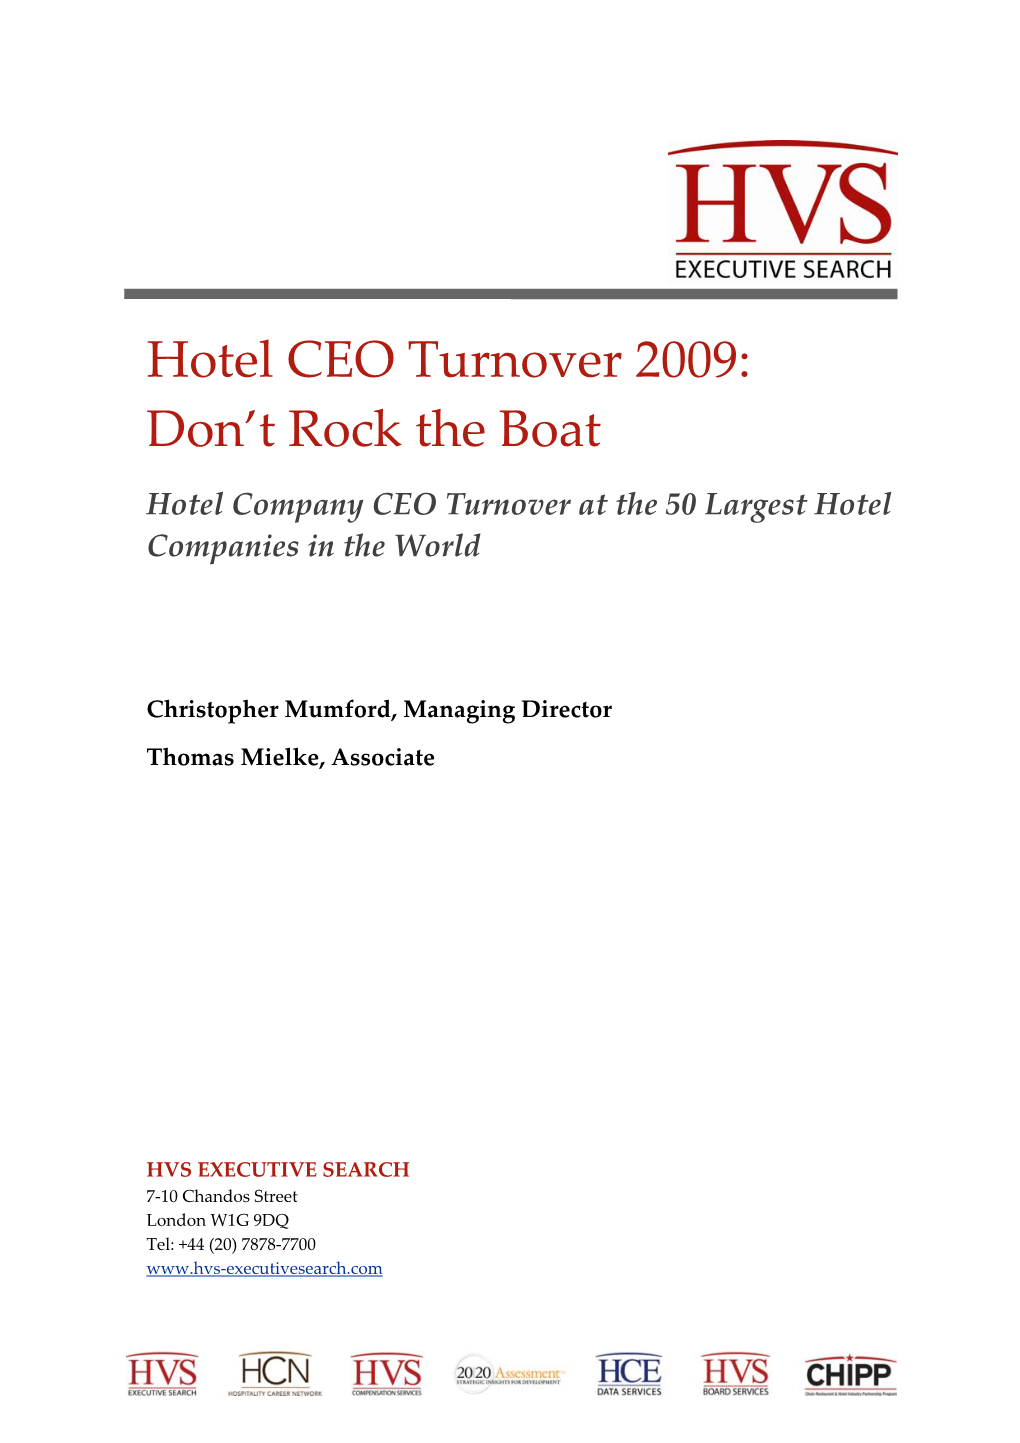 Hotel CEO Turnover 2009: Don’T Rock the Boat